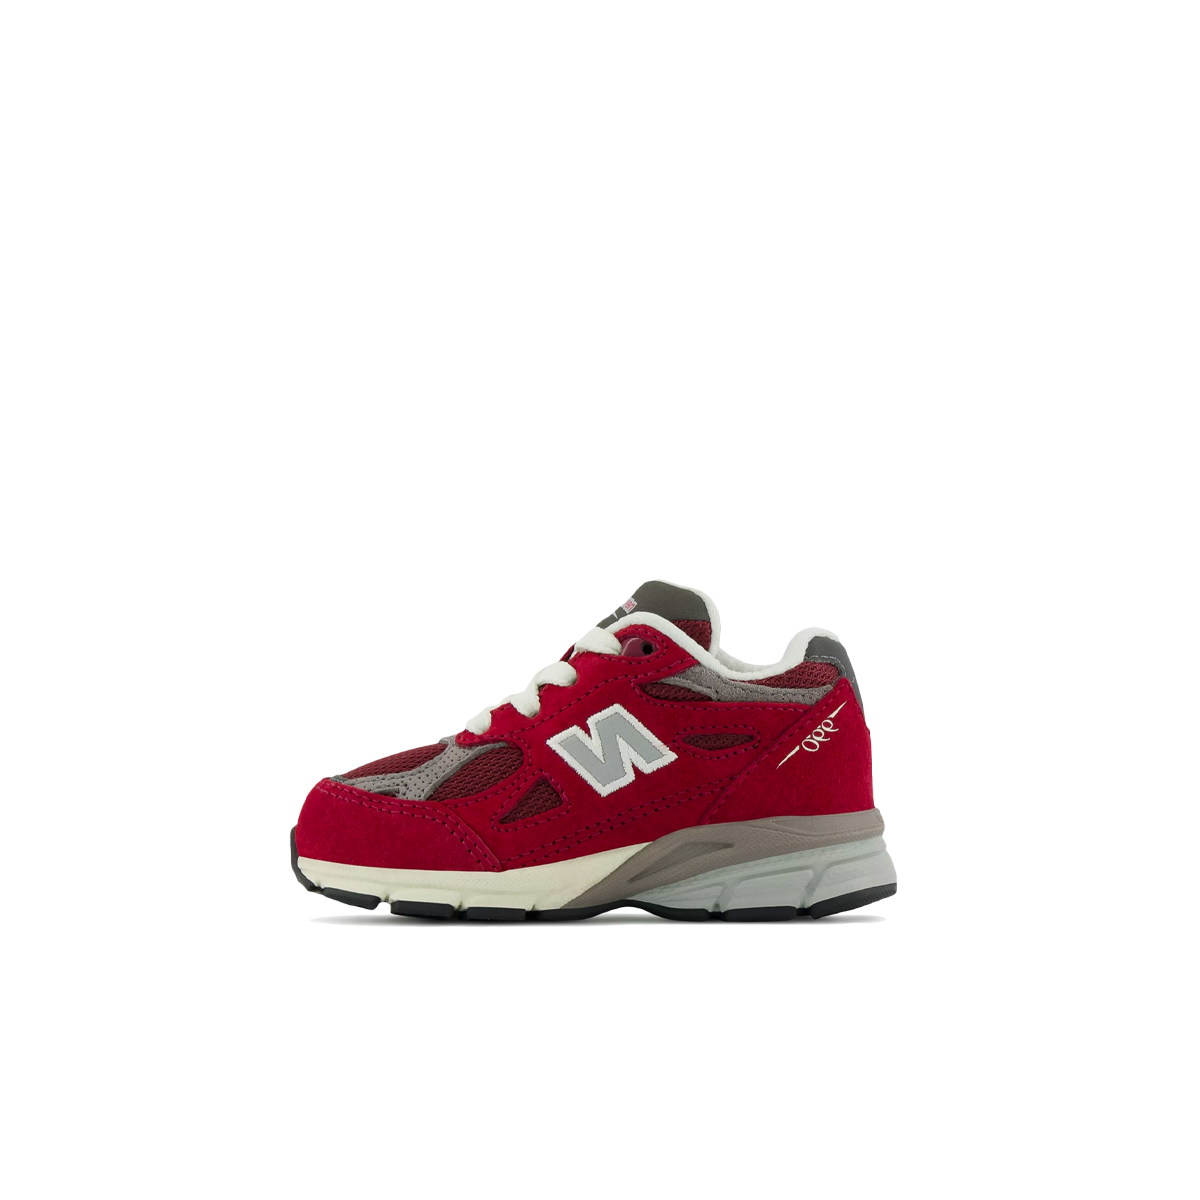 New Balance 990v3 IC 'Scarlet' - Made in USA